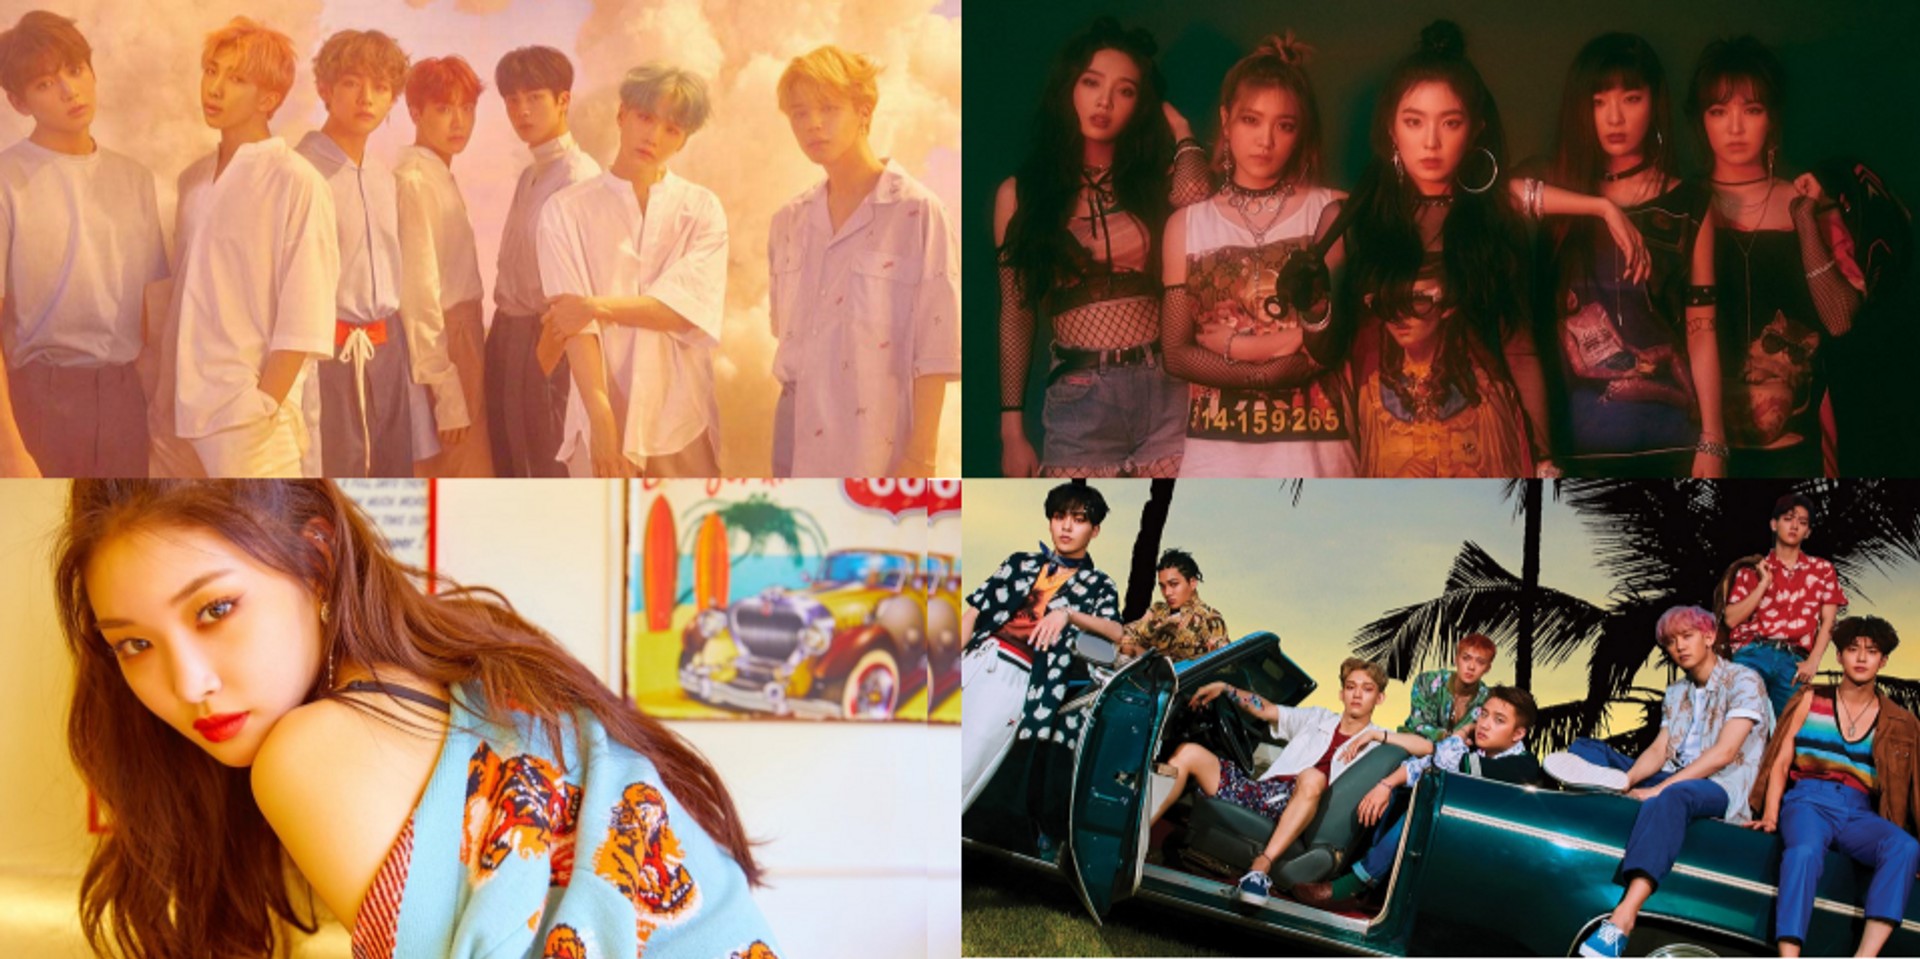 10 Korean music acts to look out for in 2018